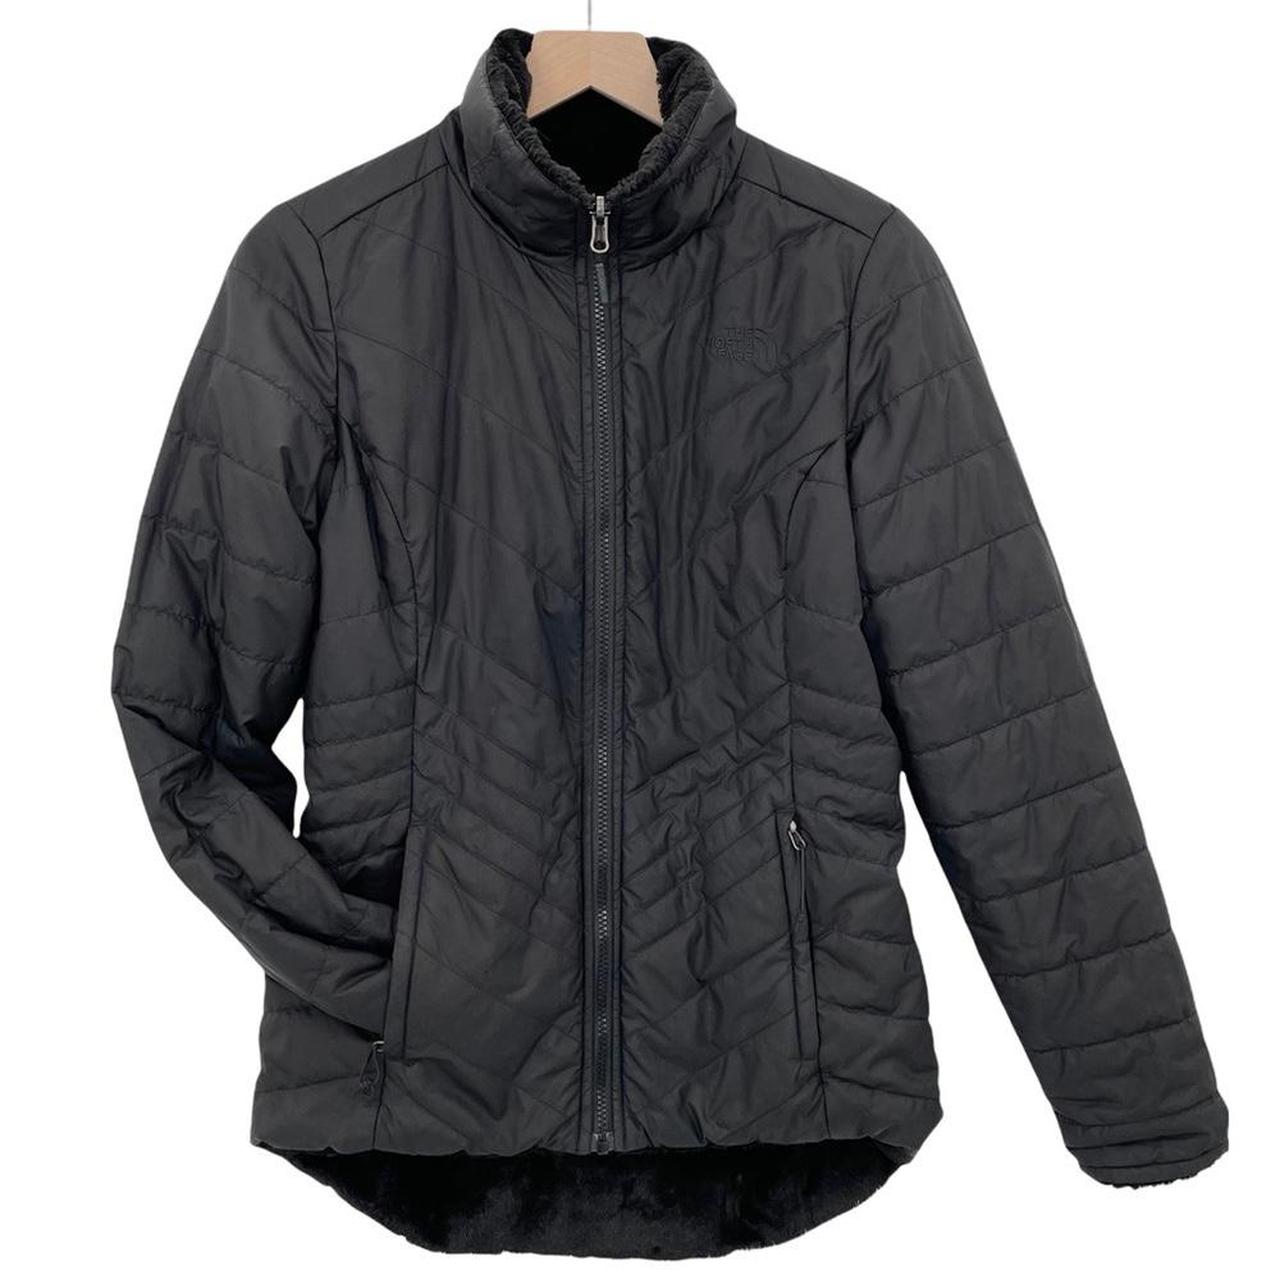 Product Image 1 - The North Face Women's Mossbud